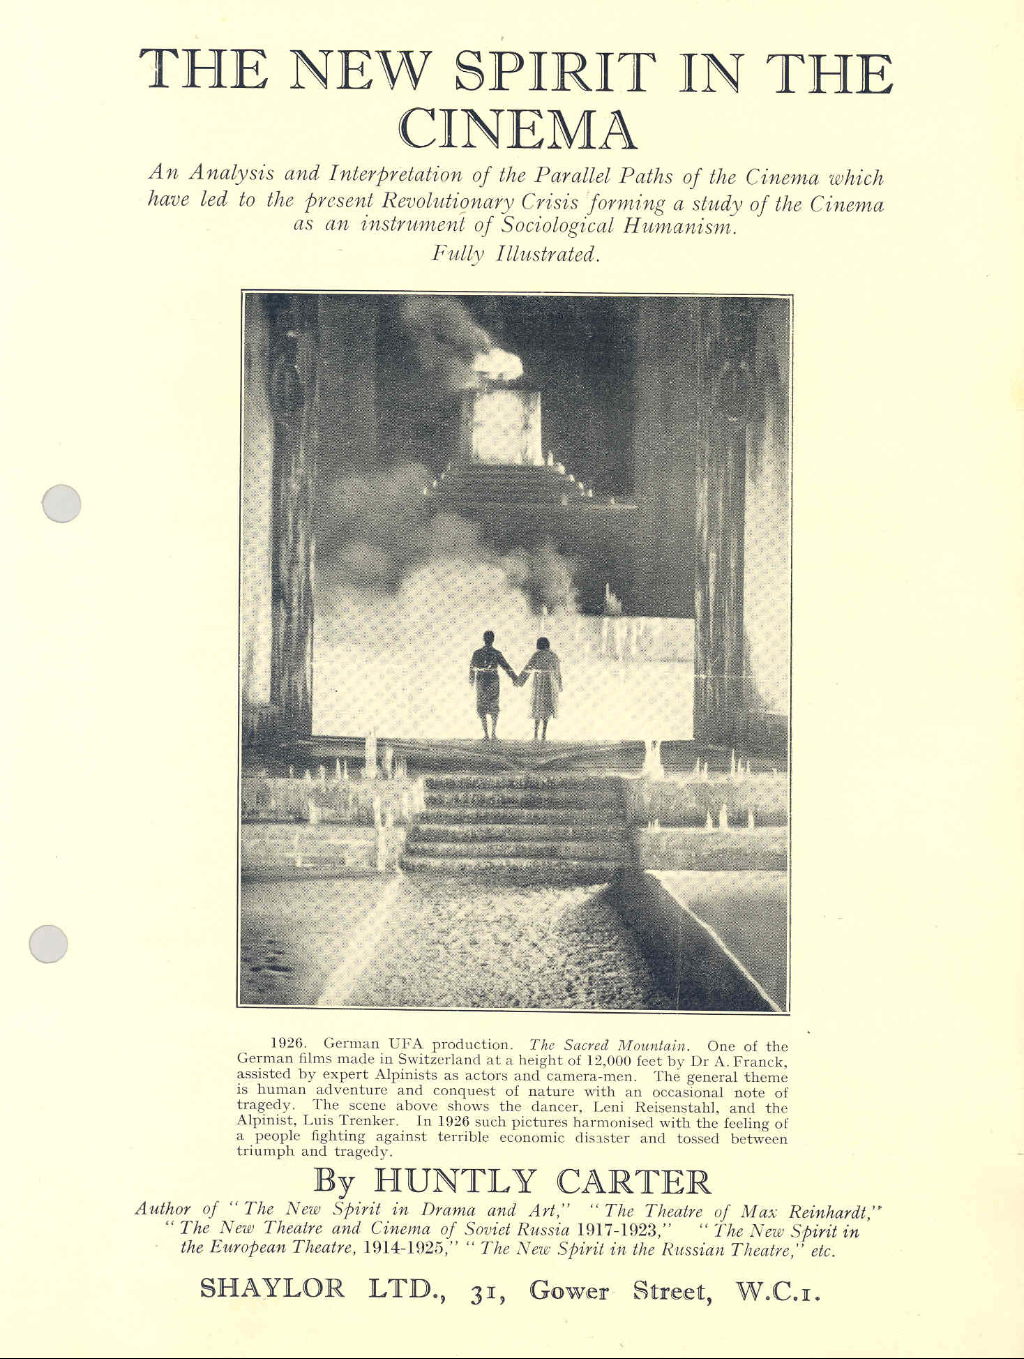 Promotional leaflet for The New Spirit in the Cinema